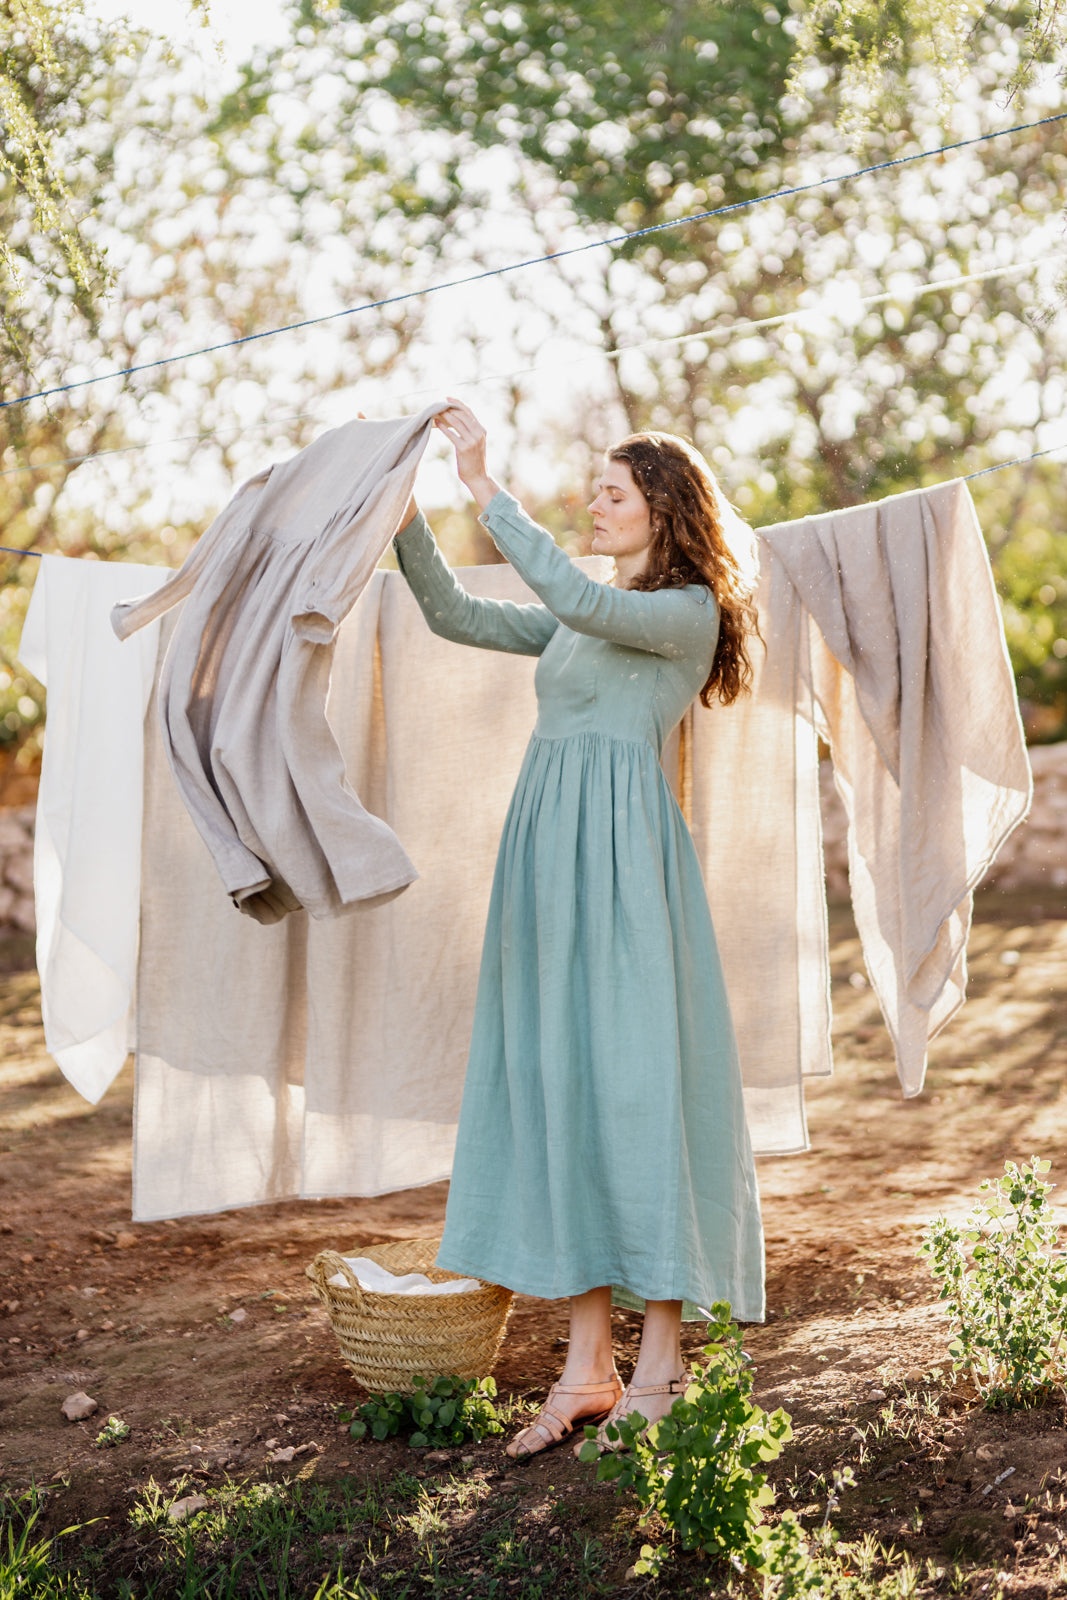 How to Care for Linen Clothing - Dengarden